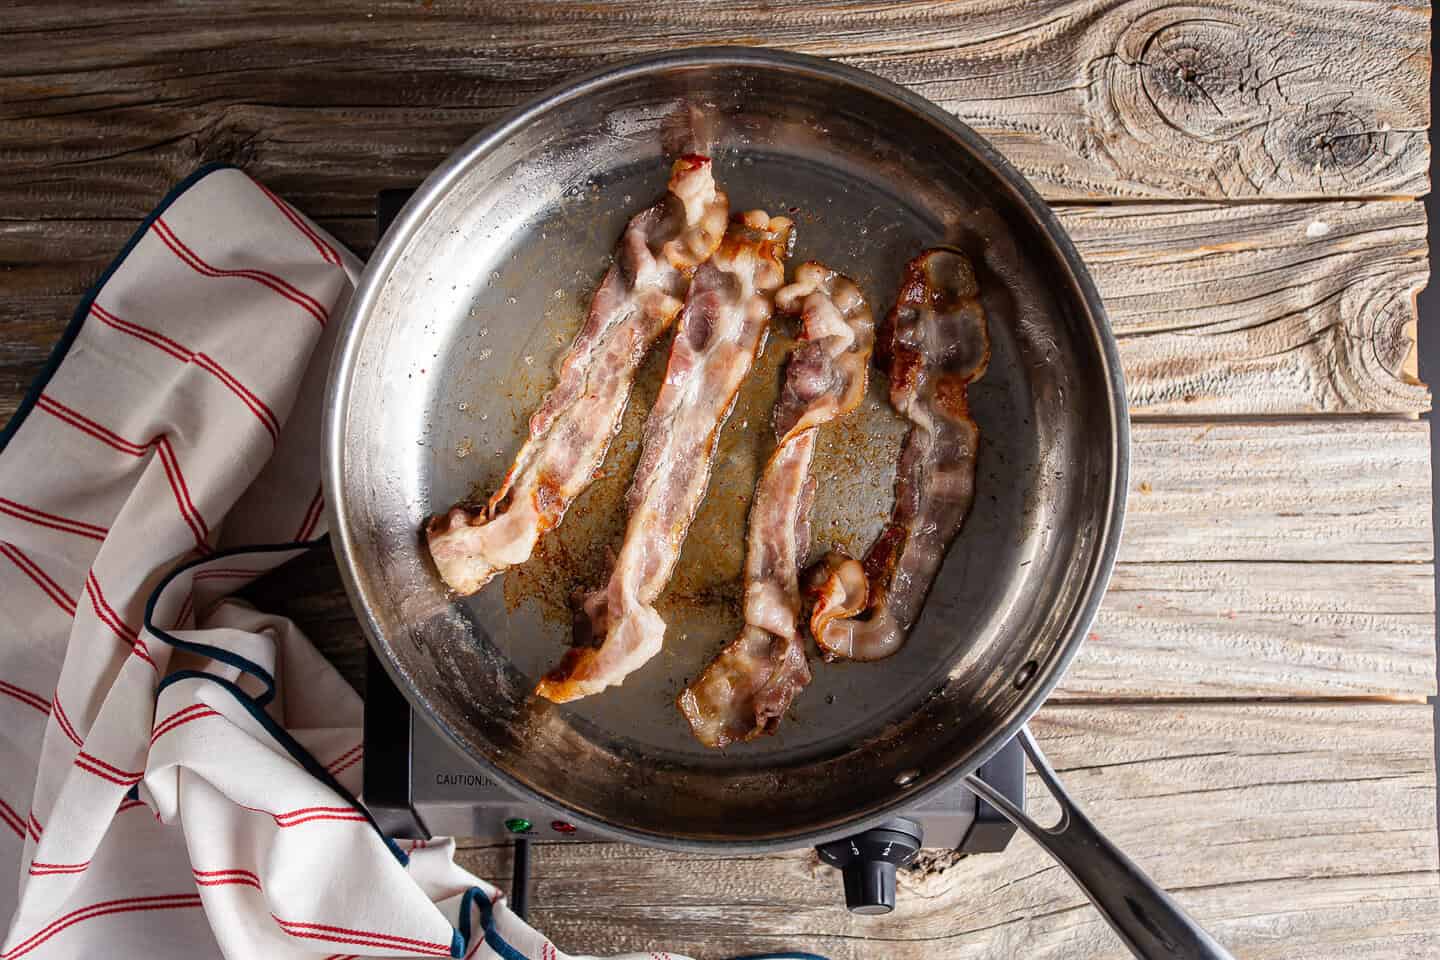 Rendering bacon in a large stainless steel skillet.